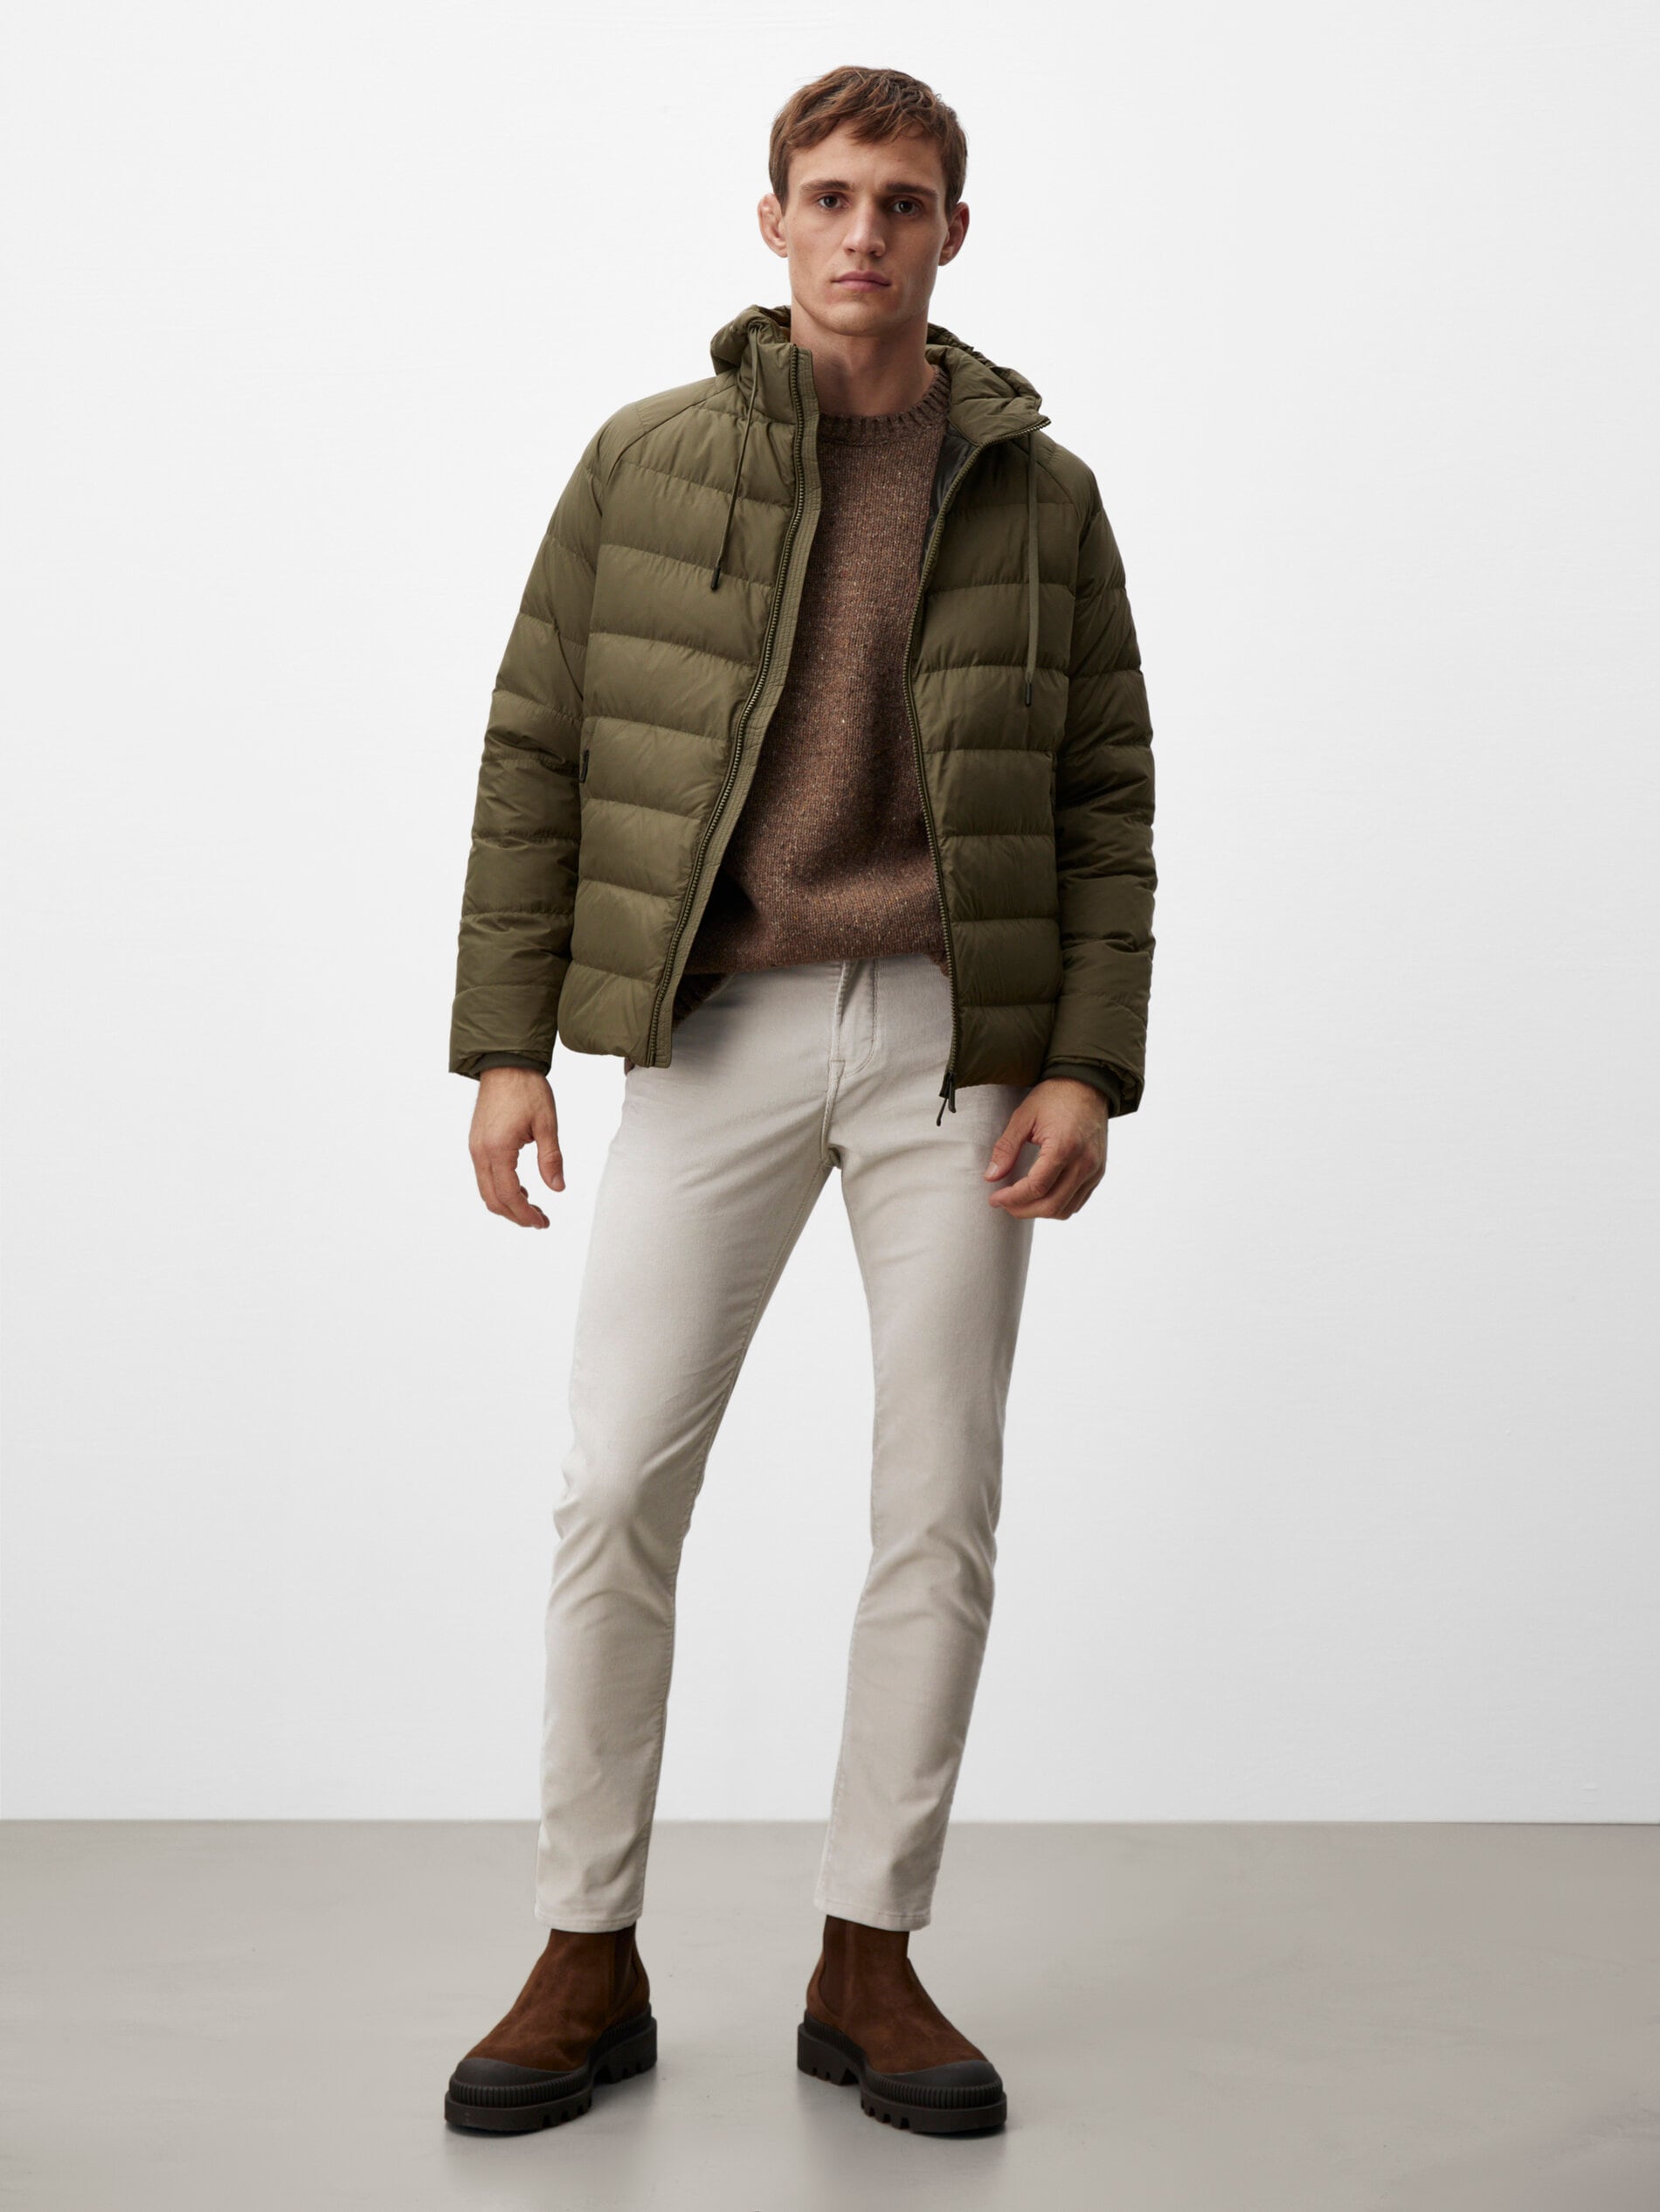 style a puffer jacket